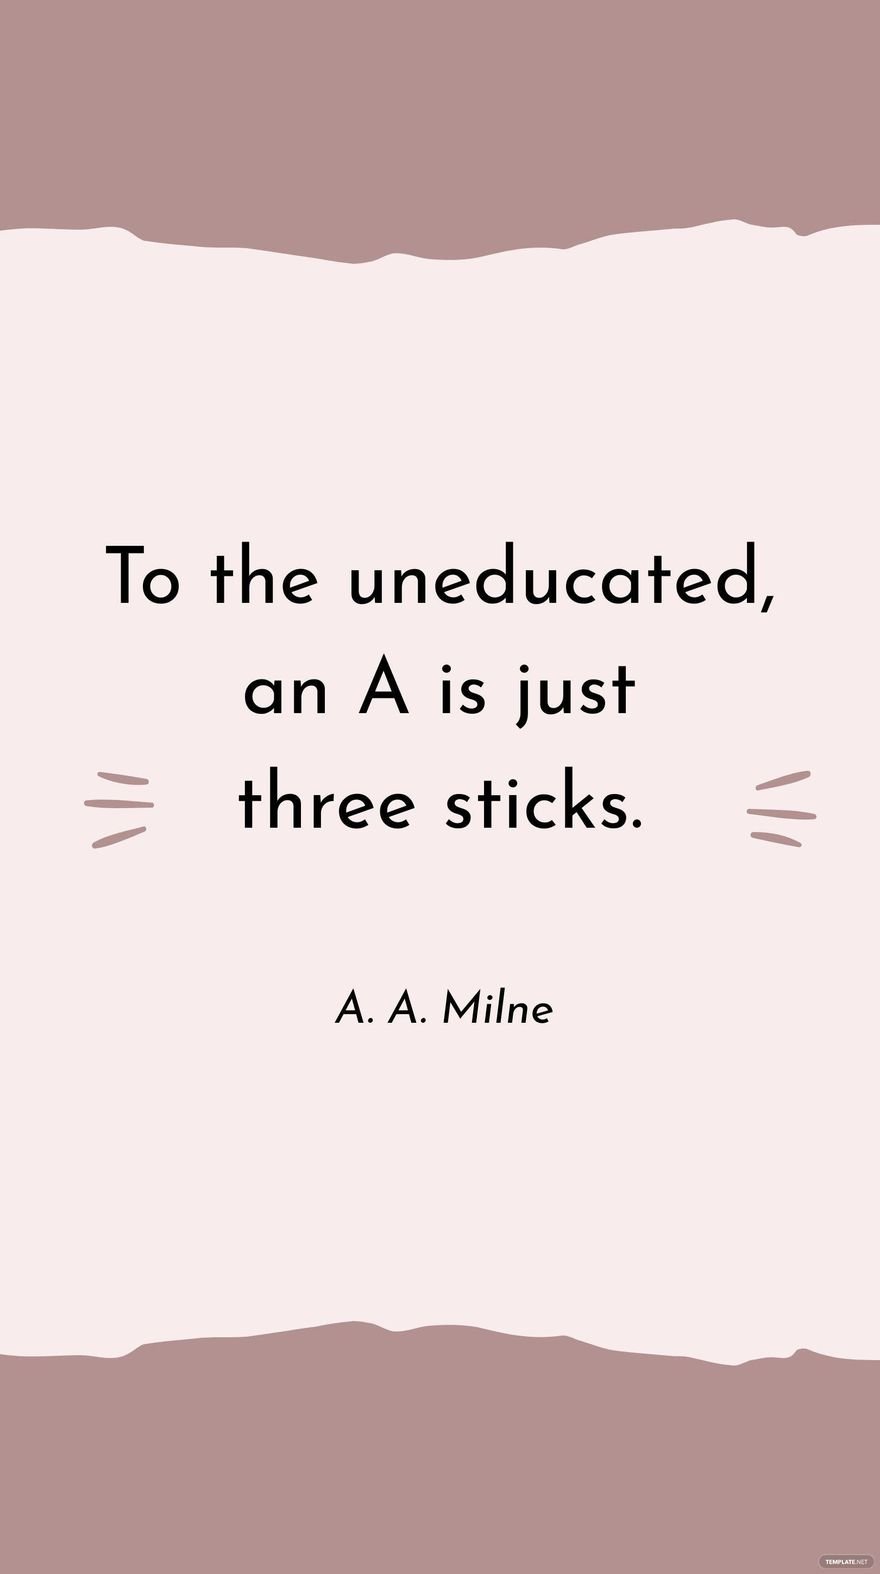 A. A. Milne - To the uneducated, an A is just three sticks.